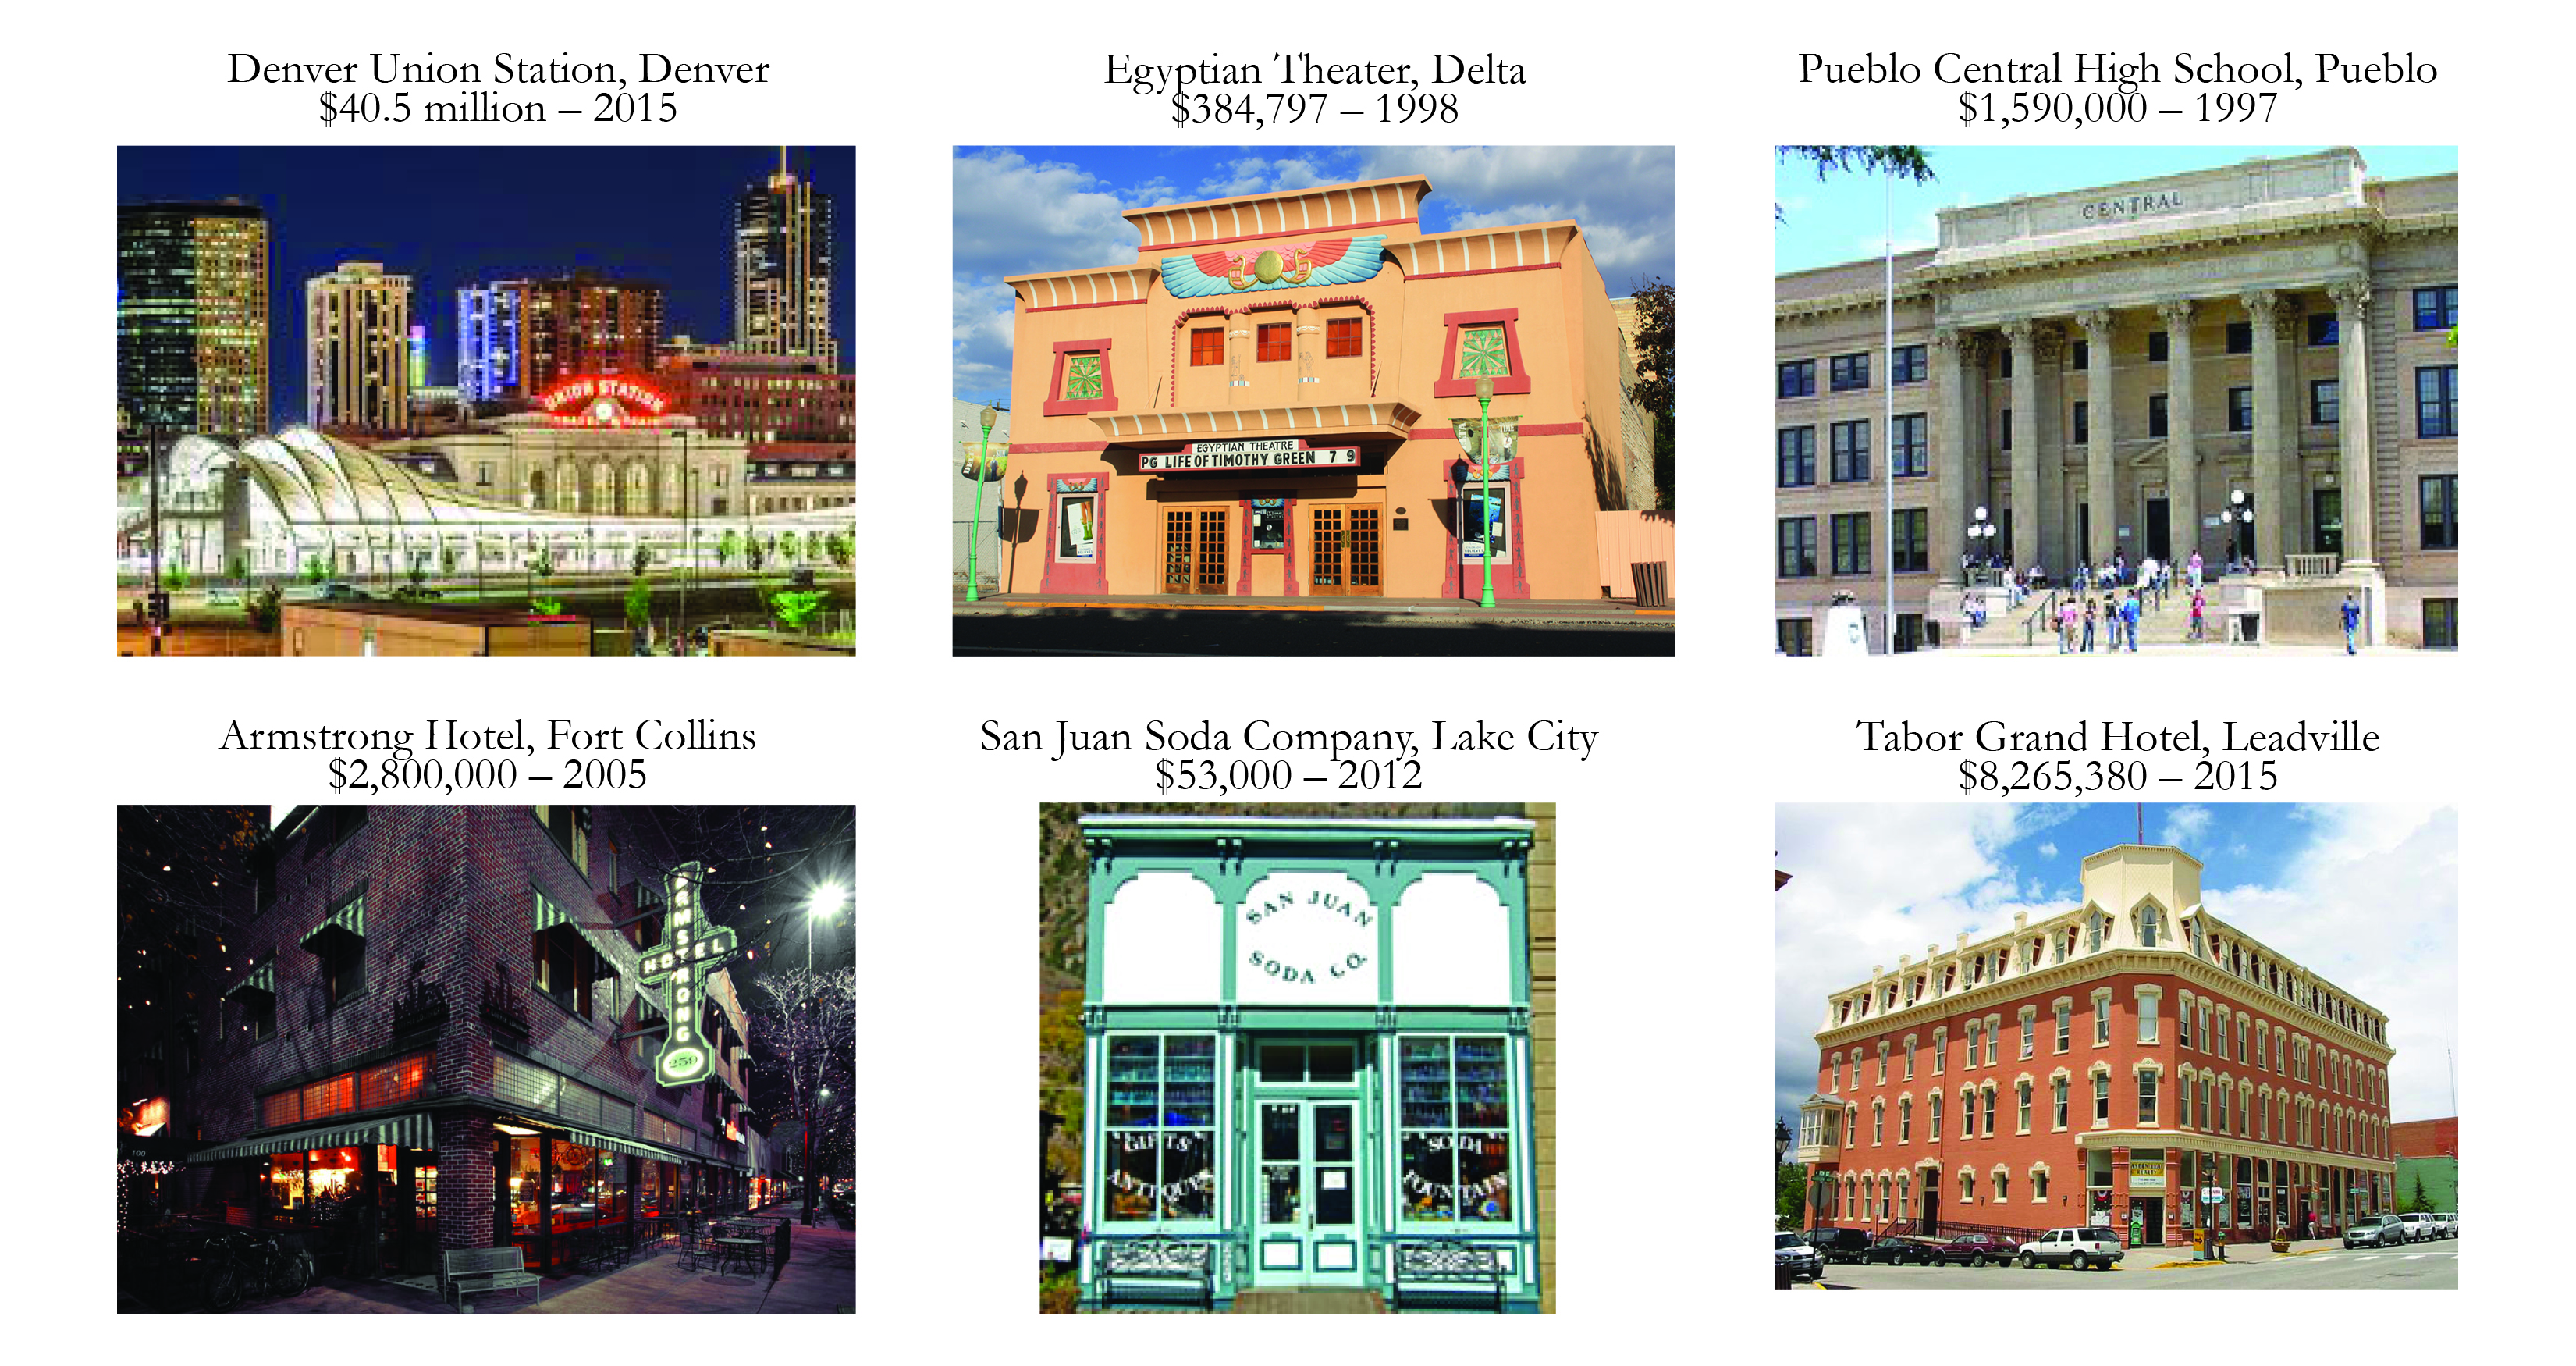 A collage of six Federal Historic Tax Credit projects, including Denver Union Station, the Egyptian Theater in Delta, Pueblo Central High School, the Armstrong Hotel in Fort Collins, the San Juan Soda Company in Lake City, and the Tabor Grand Hotel in Leadville.